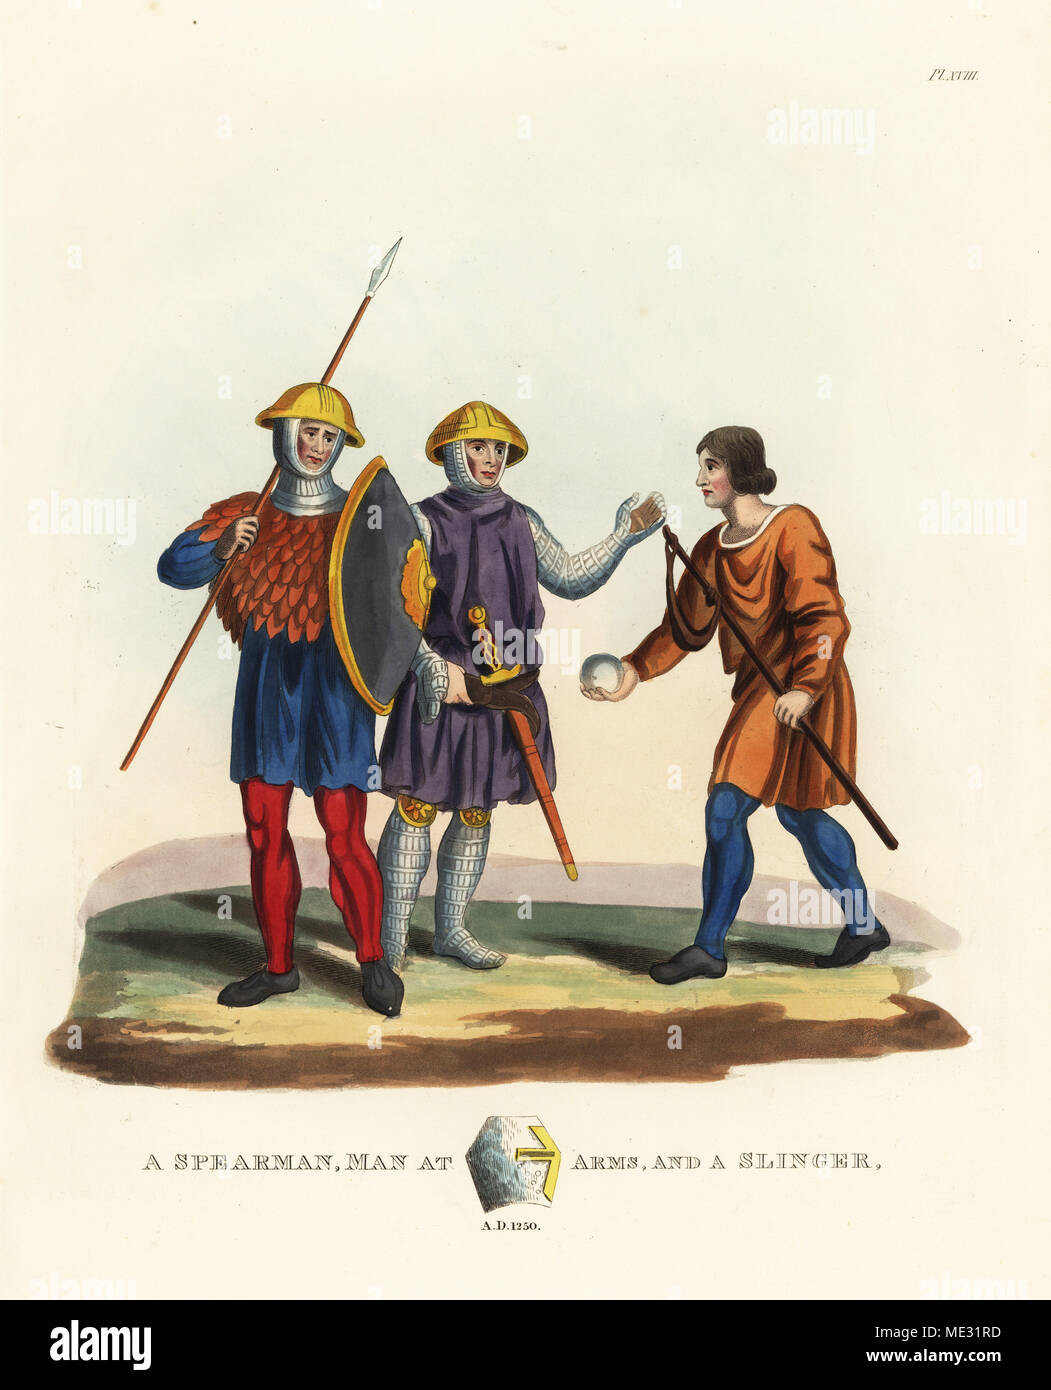 A spearman, man at arms and slinger, 1250. English infantry, 13th century. Spearman and soldier wear bowl helmets and chainmail armour and carry lance, shield and sword, and the slinger carries a rock and slingshot. Handcoloured lithograph after an illustration by S.R. Meyrick from Sir Samuel Rush Meyrick's A Critical Inquiry into Antient Armour, John Dowding, London, 1842. Stock Photo